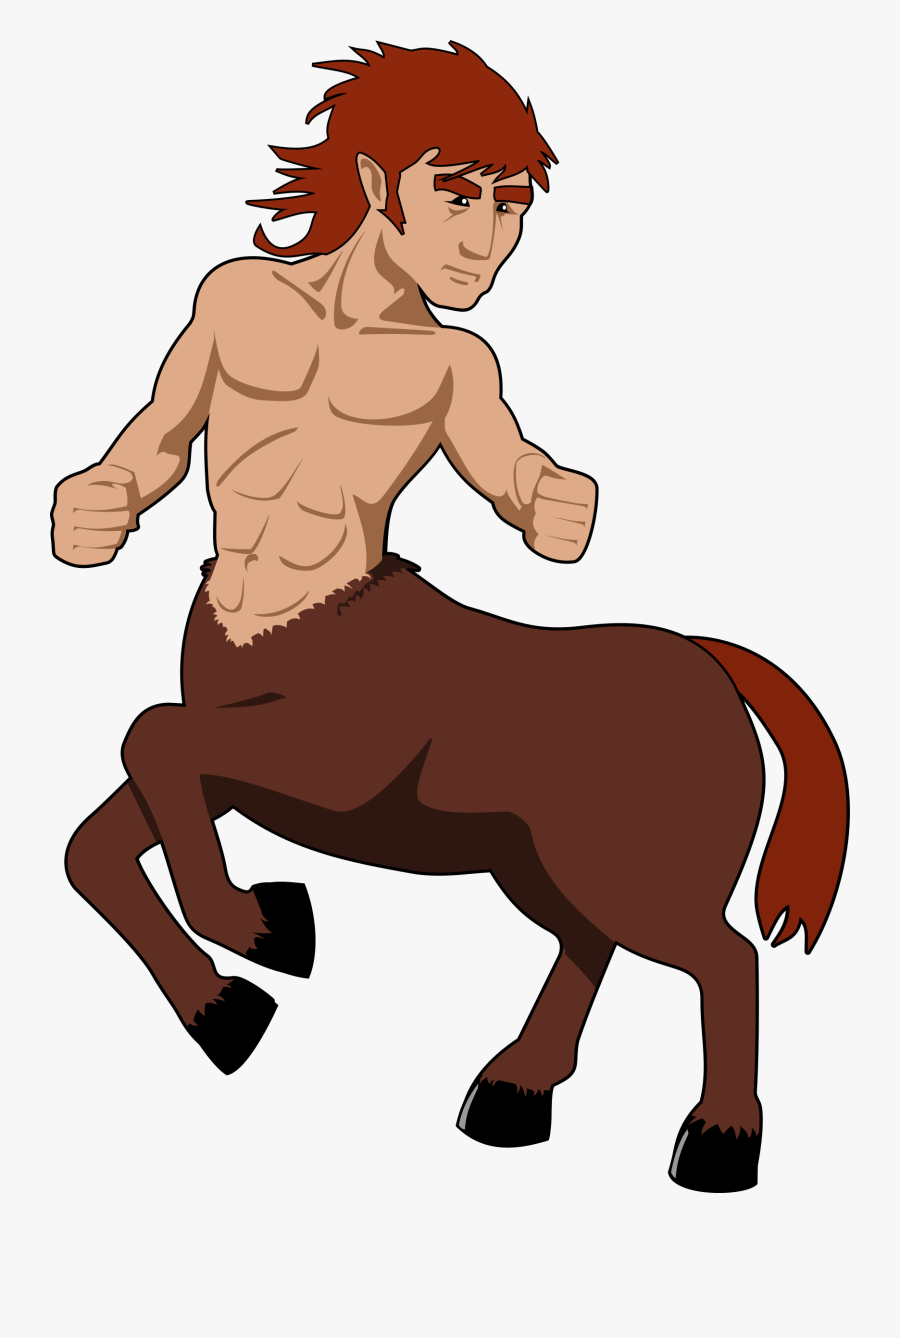 Red Headed Boy Eating Cheeseburger Png - Centaur Clipart, Transparent Clipart